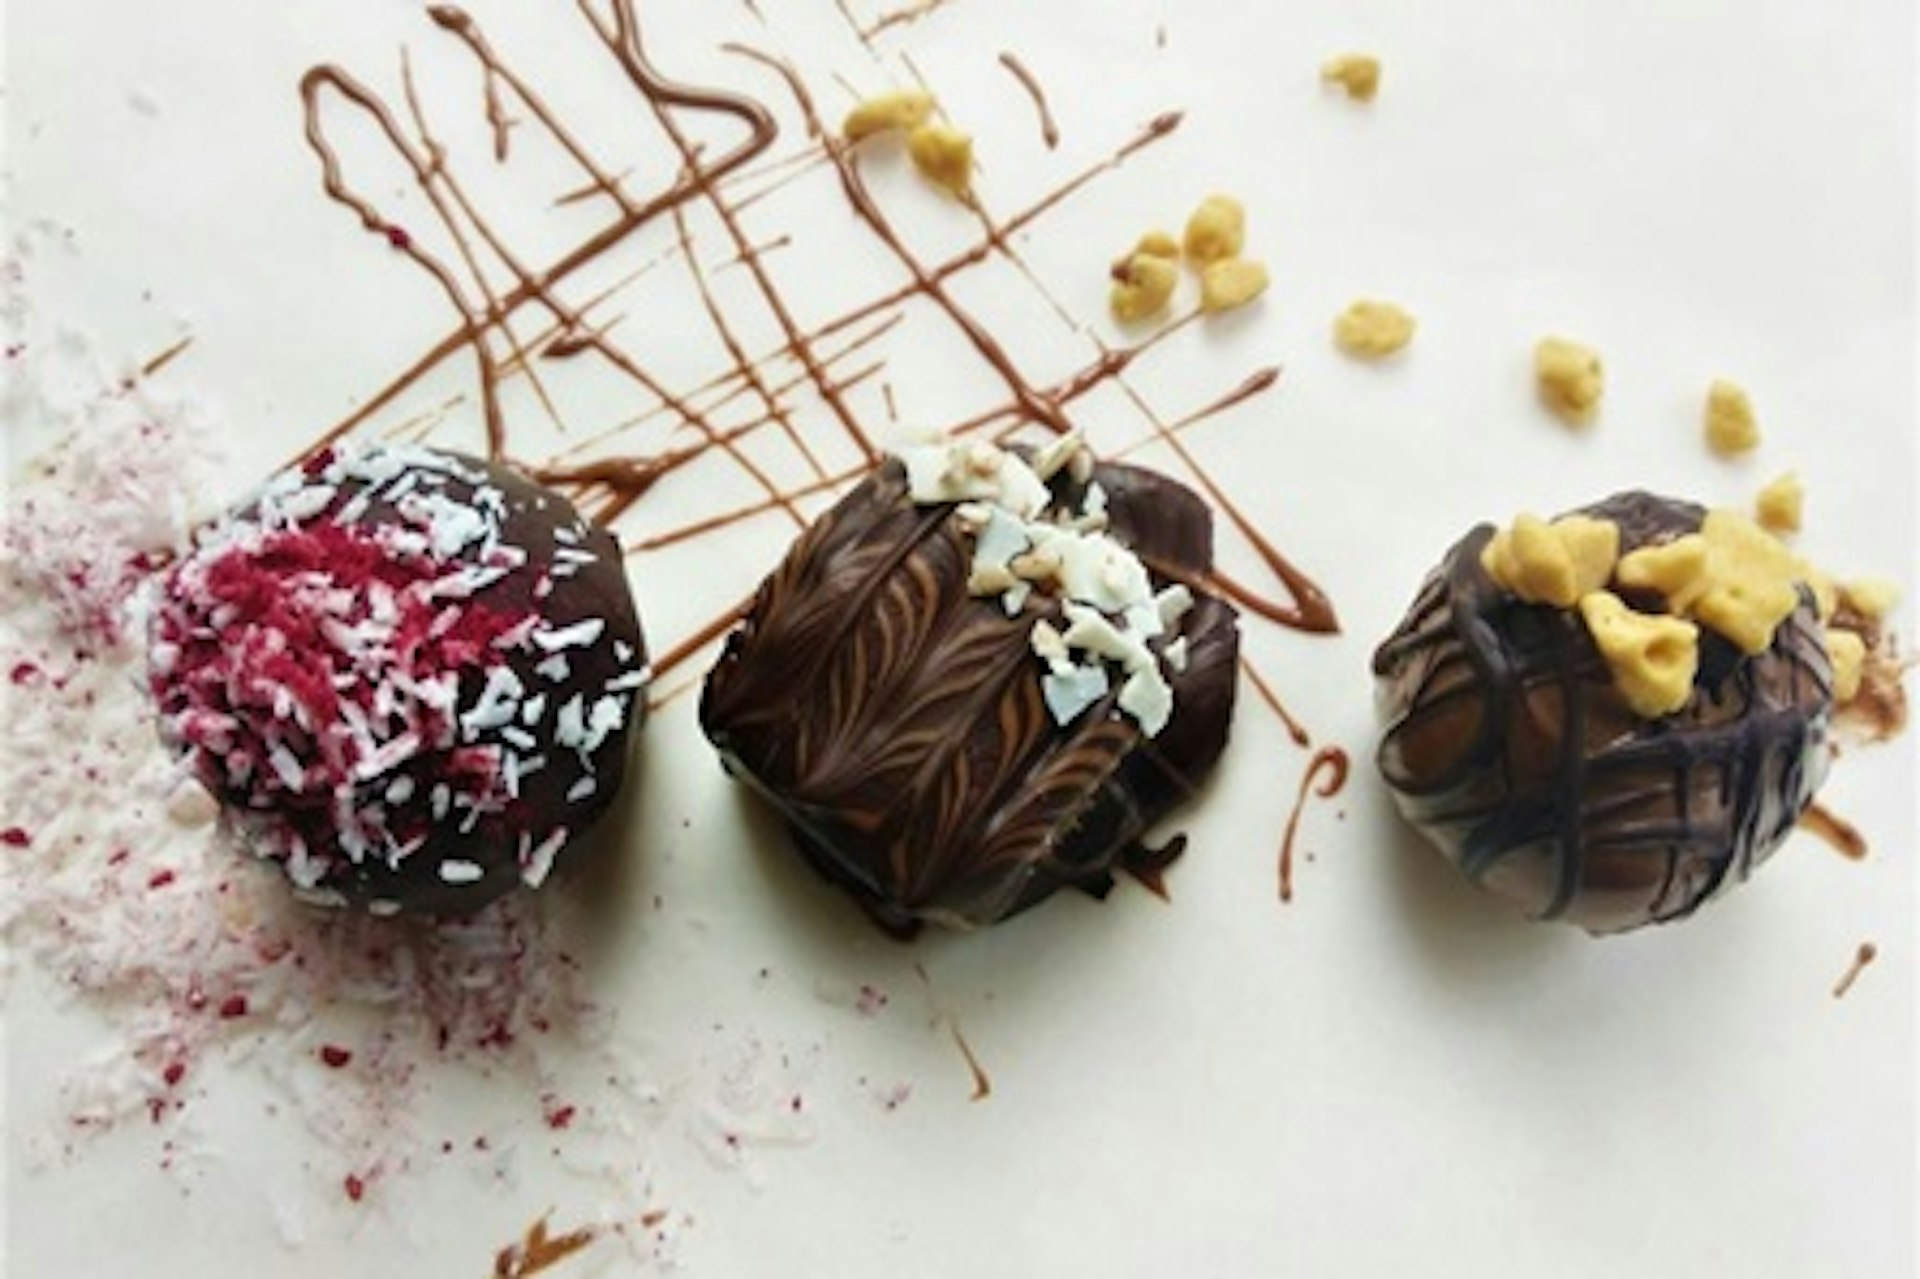 Live Online Chocolate Truffle Making Experience and Kit with My Chocolate 4